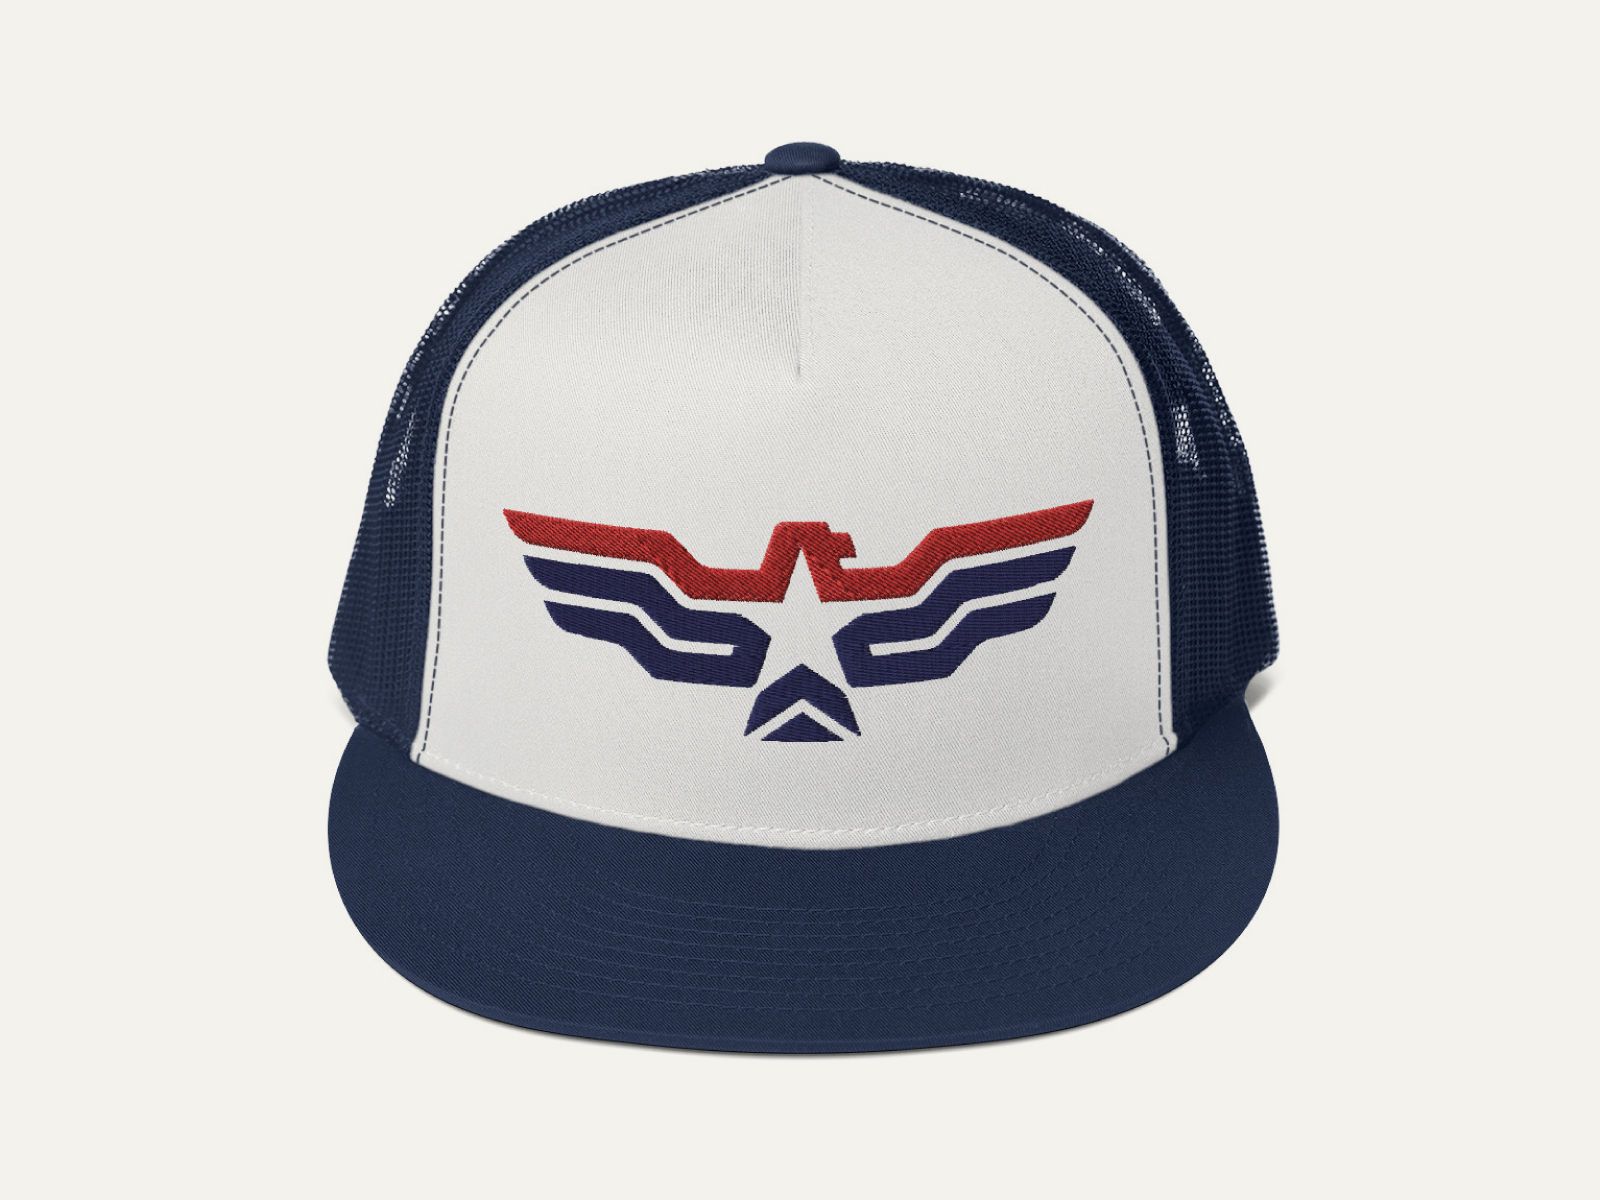 Eagle Cap by Allan Peters on Dribbble